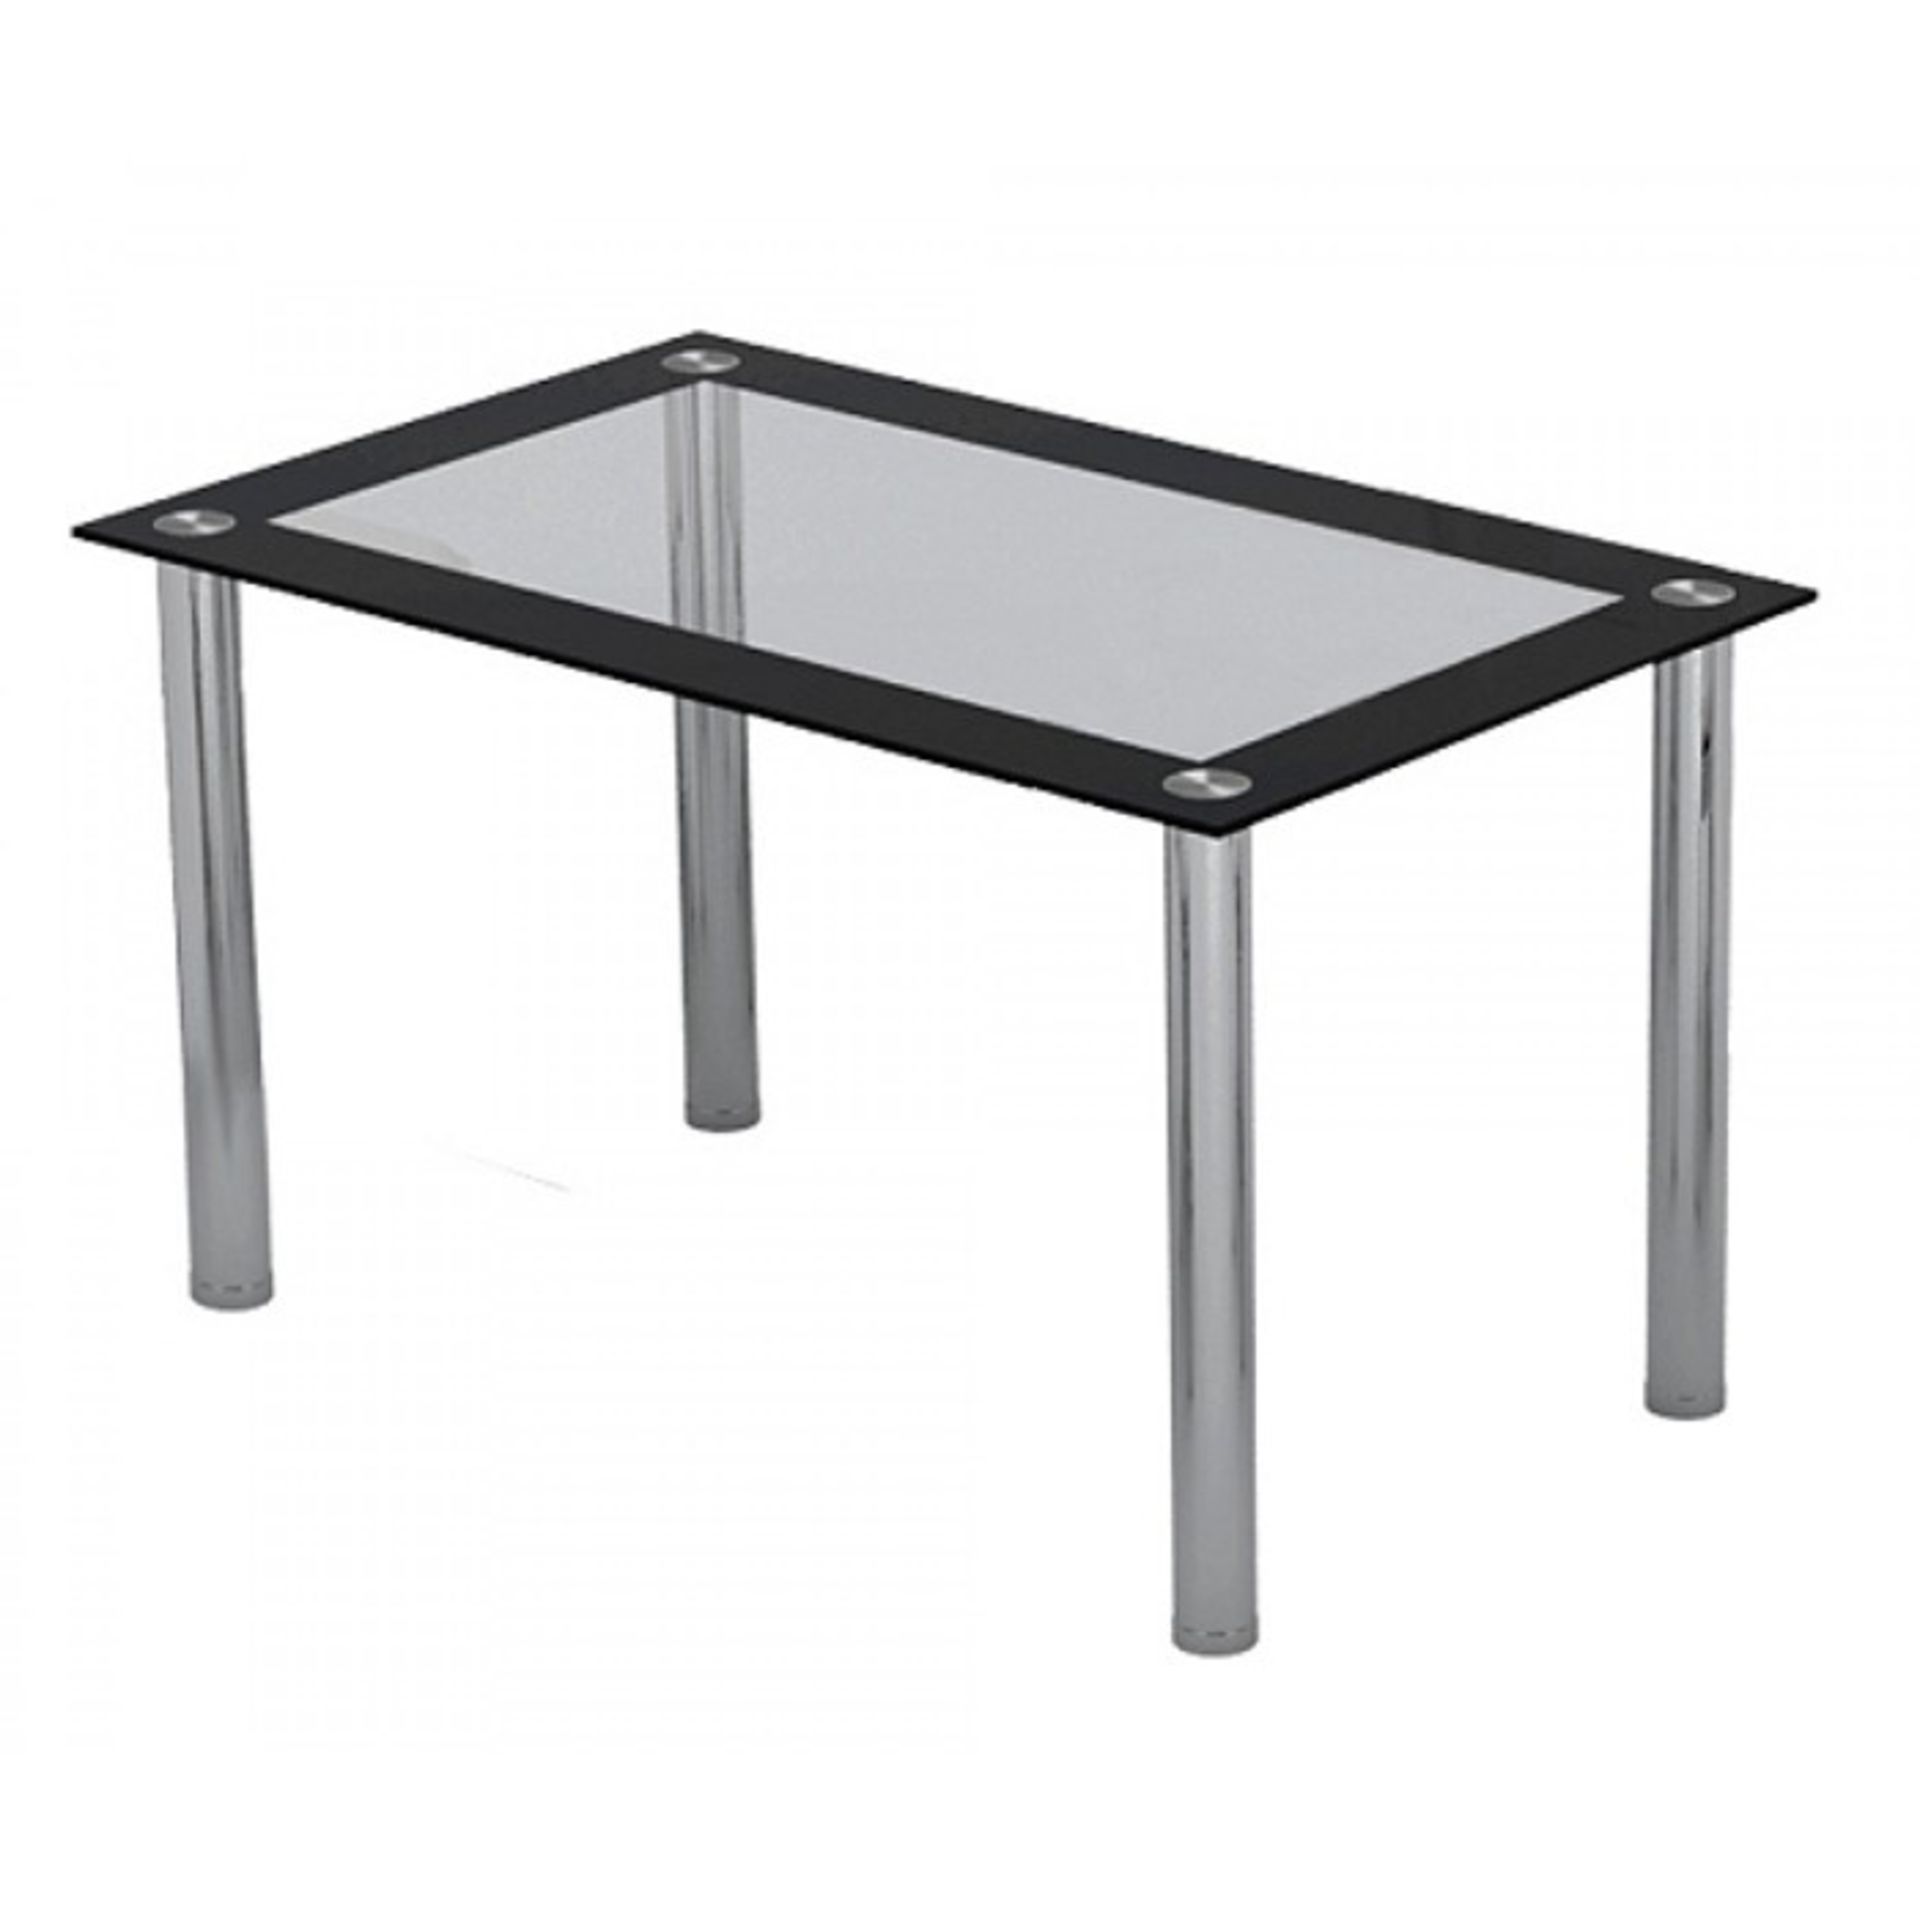 1 AS NEW BOXED 4 SEATER DINING TABLE WITH CLEAR GLASS AND BLACK TRIM WITH CHROME LEGS / DTBL013